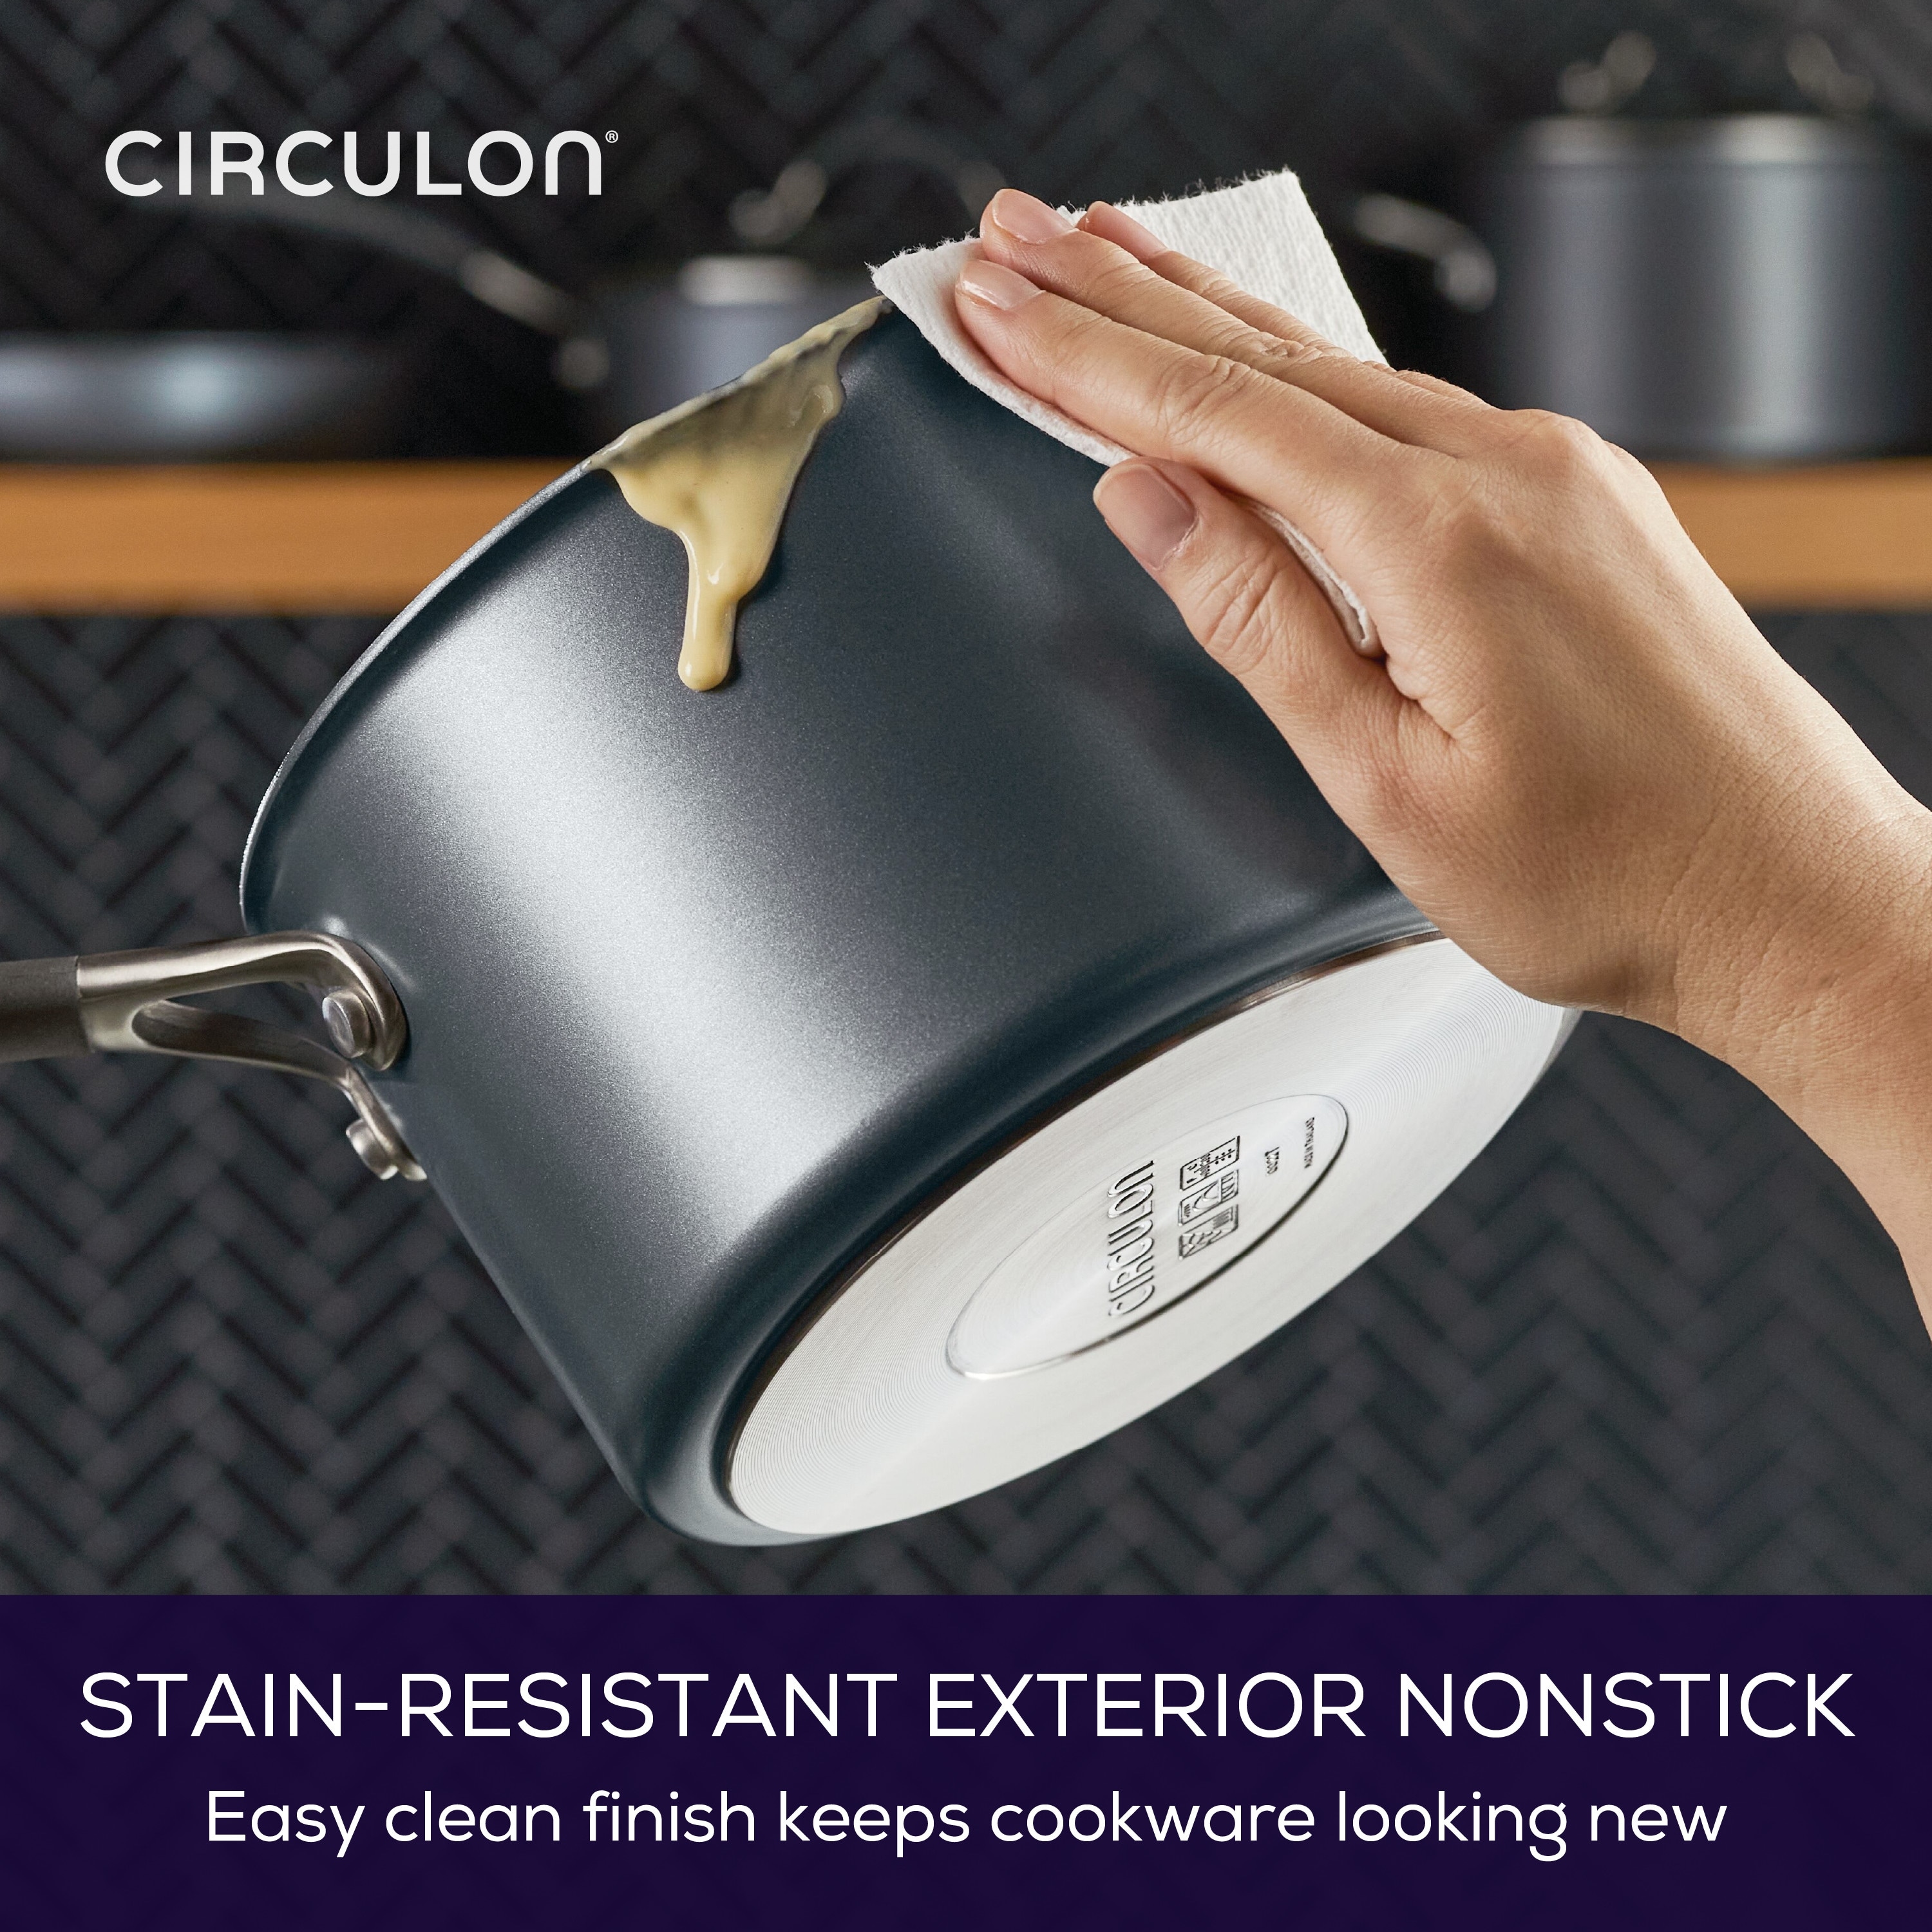 https://ak1.ostkcdn.com/images/products/is/images/direct/6573164044cacfc1070ba4832caeee2cba49cdf3/Circulon-A1-Series-with-ScratchDefense-Technology-Nonstick-Induction-Pots-and-Pans-Cookware-Set%2C-9-Piece%2C-Graphite.jpg